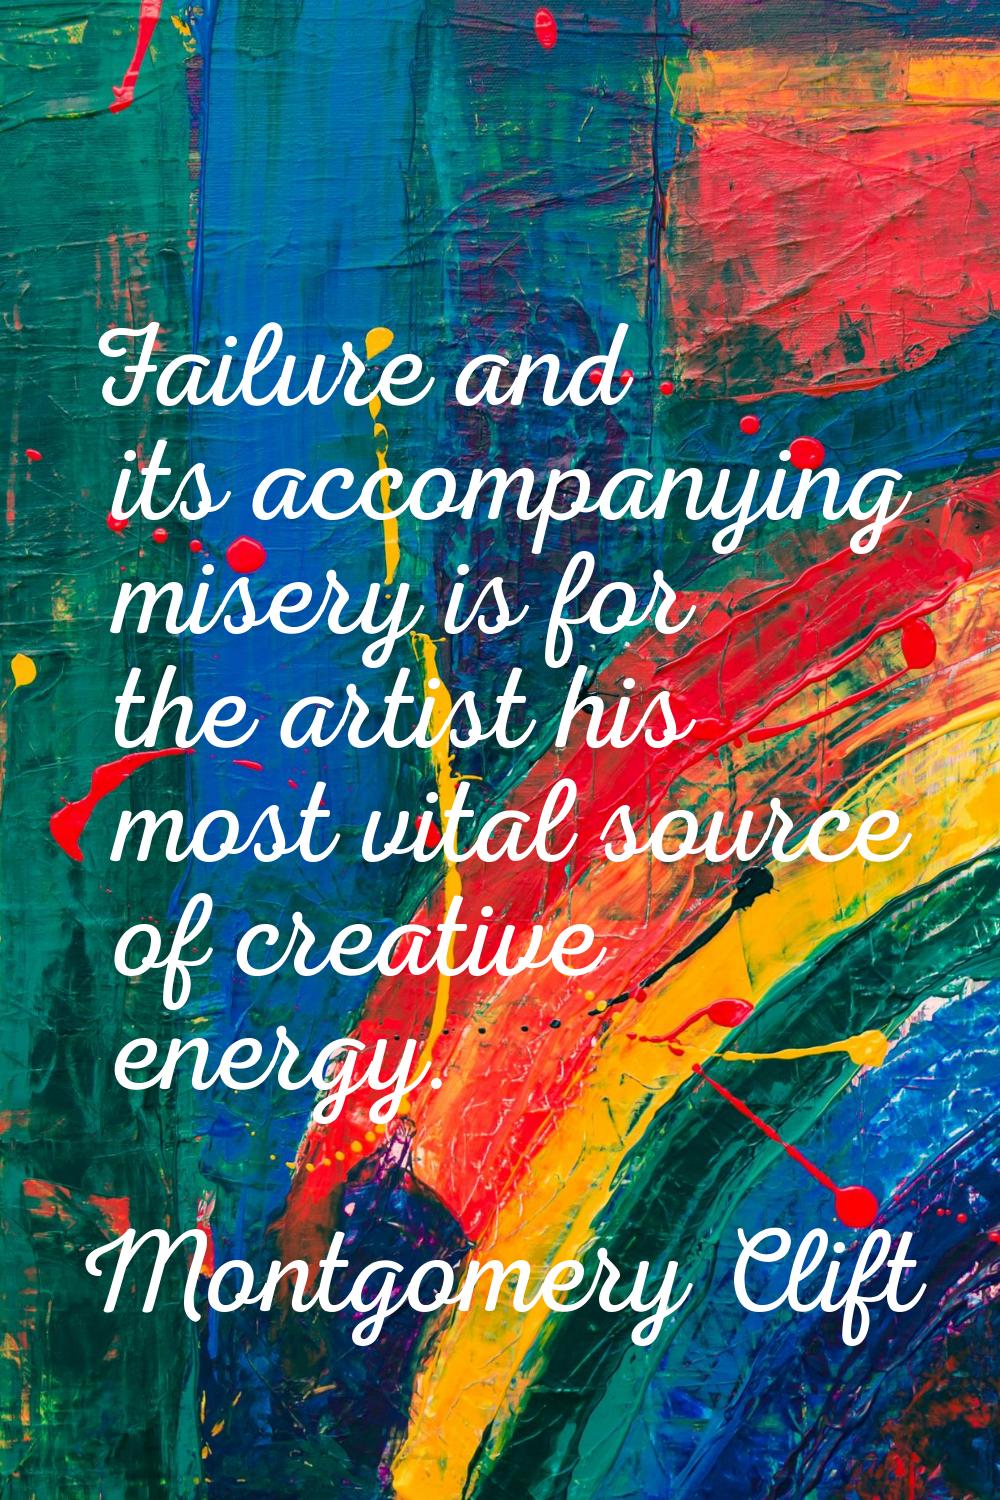 Failure and its accompanying misery is for the artist his most vital source of creative energy.